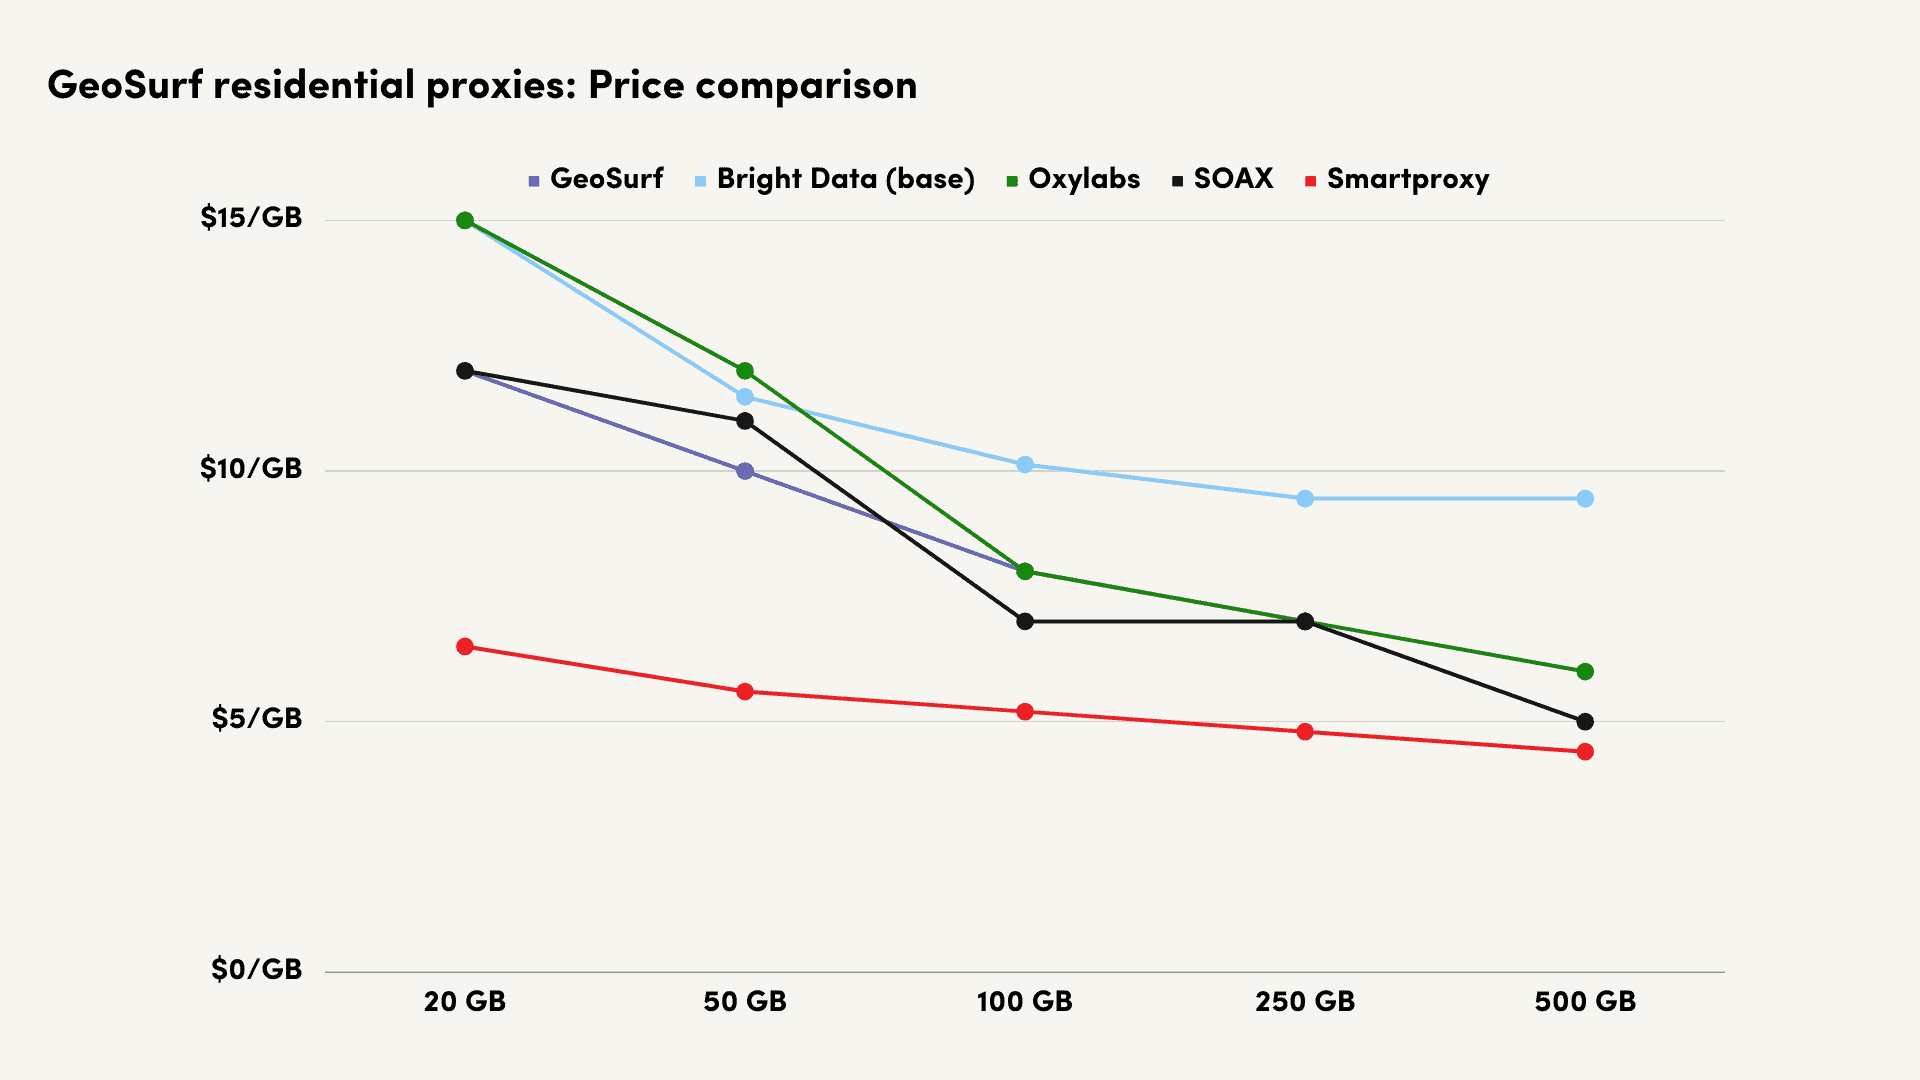 geosurf residential proxies price comparison